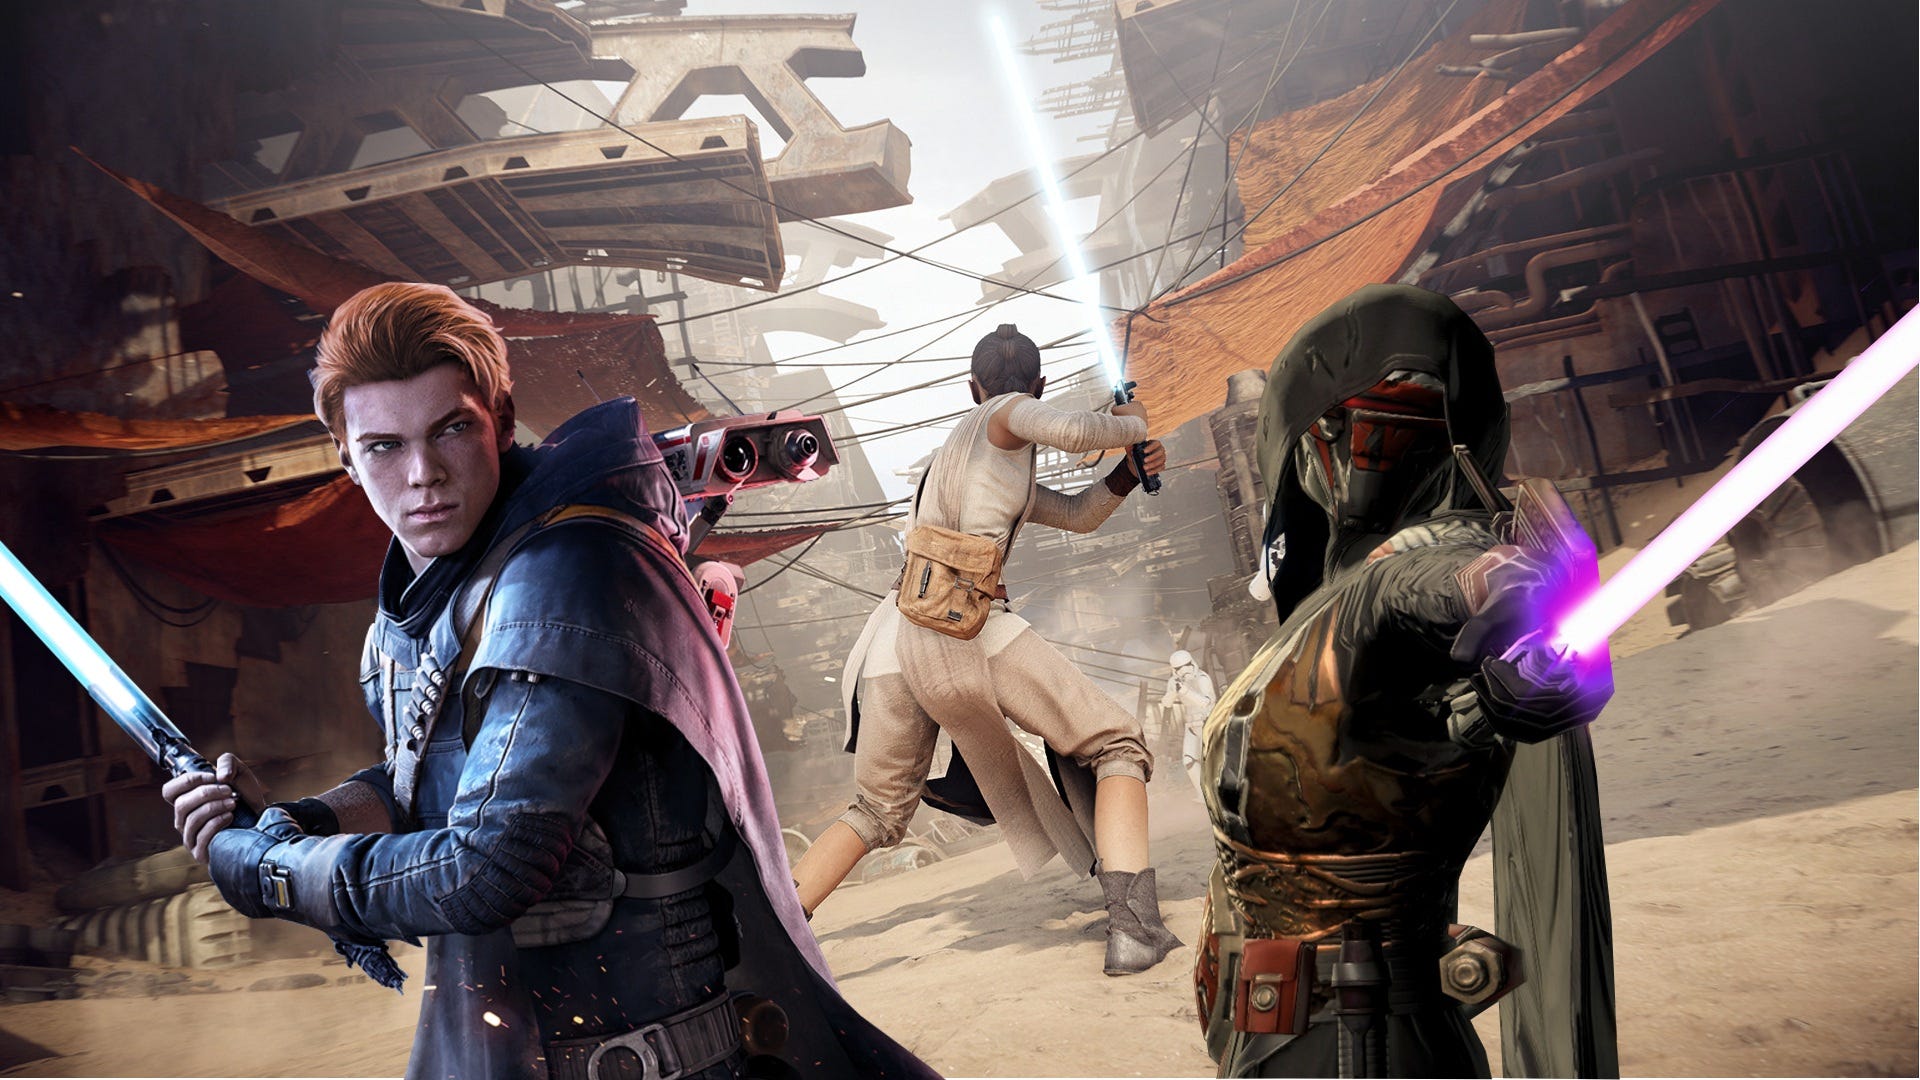 The 10 Best Star Wars games to play on PC. Rock Paper Shotgun